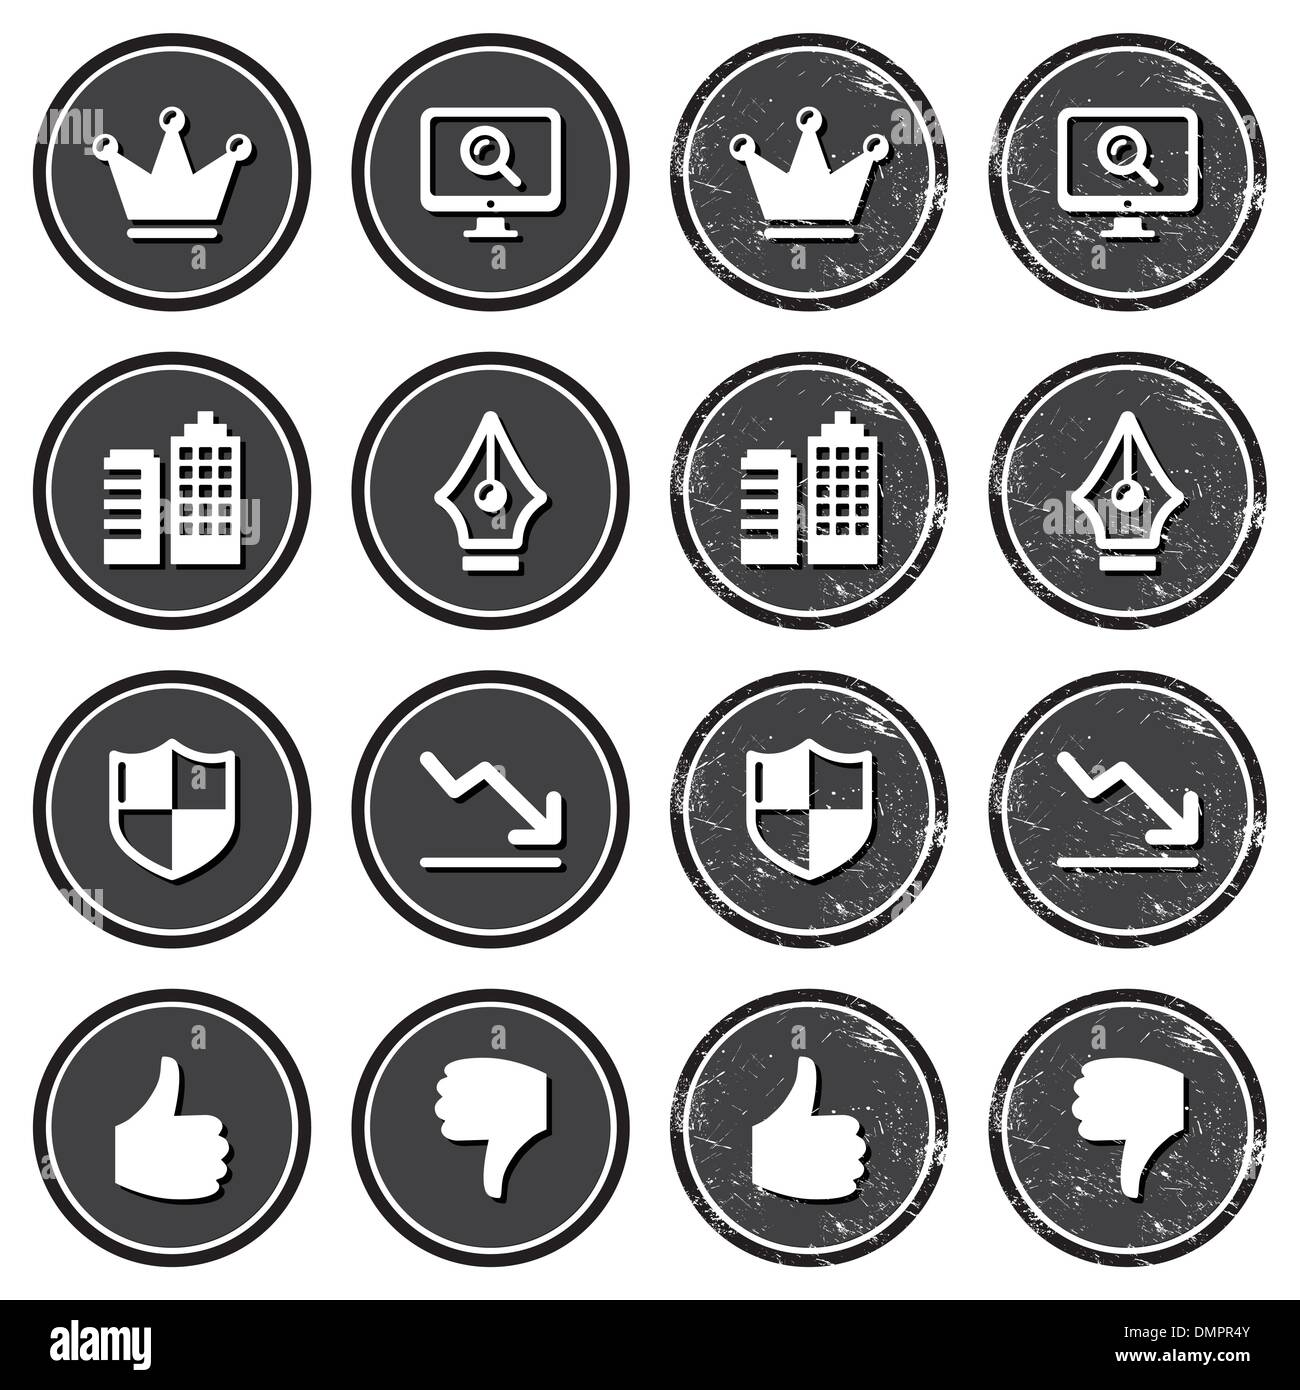 Web navigation icons on retro labels set Stock Vector